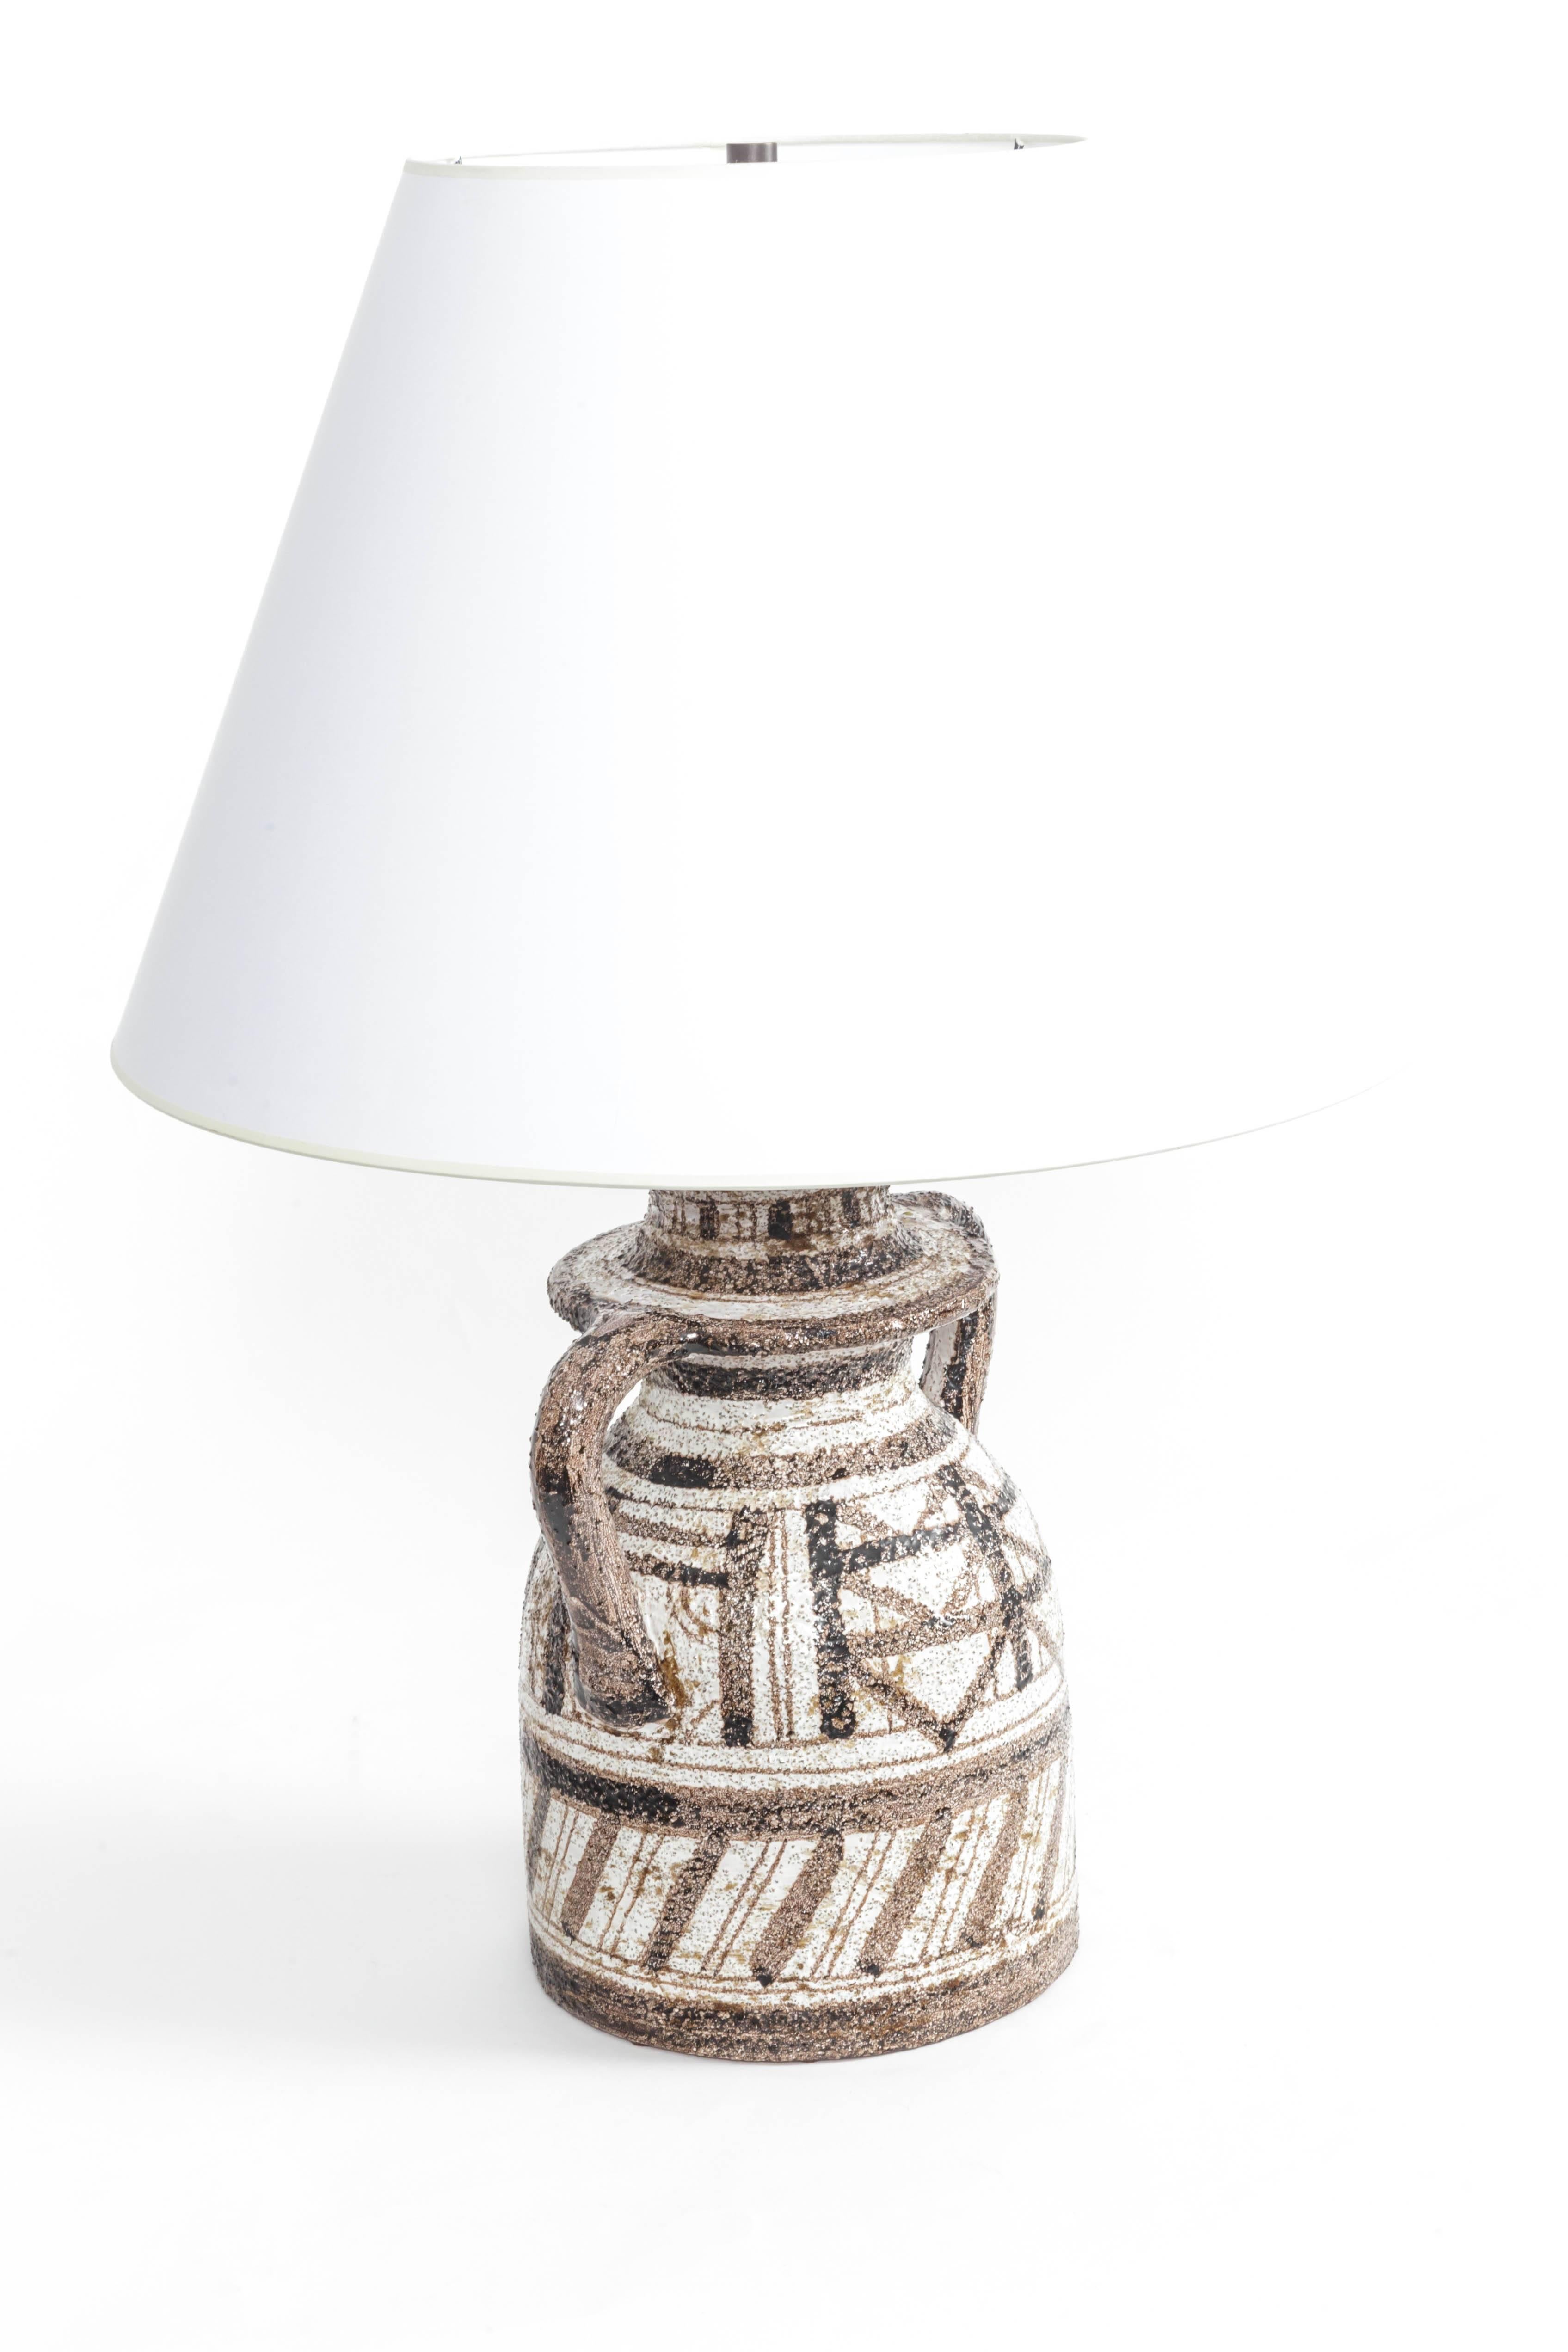 Hand-Painted Rosenthal Netter Graphic Textured Table Lamp